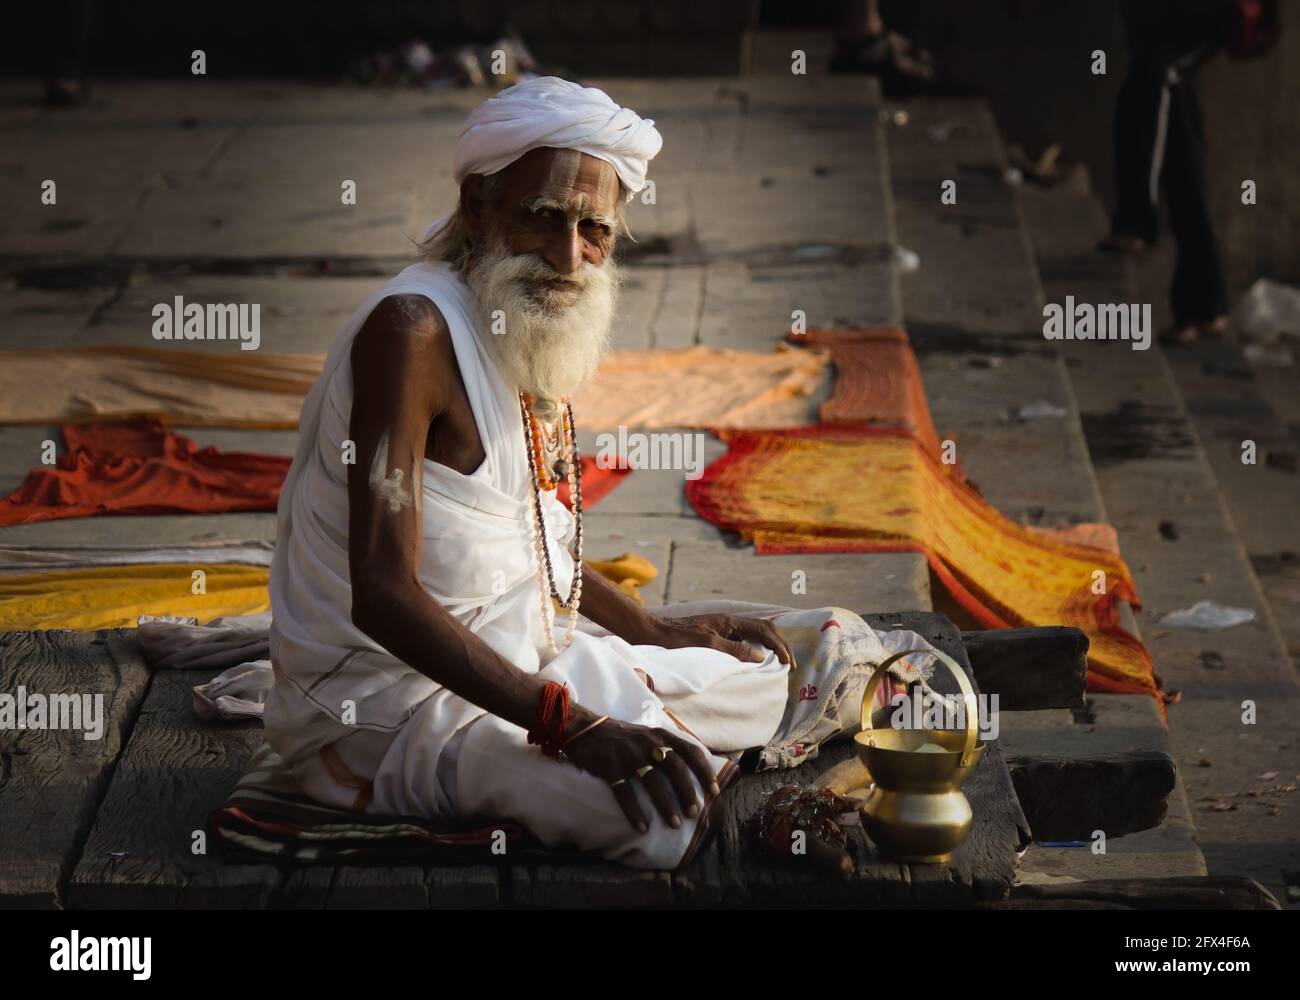 Varanasi, India - November 01, 2016: Portrait of a hindu white bearded old man sadhu, pilgrim in white clothes and turban sitting with a lota on stair Stock Photo